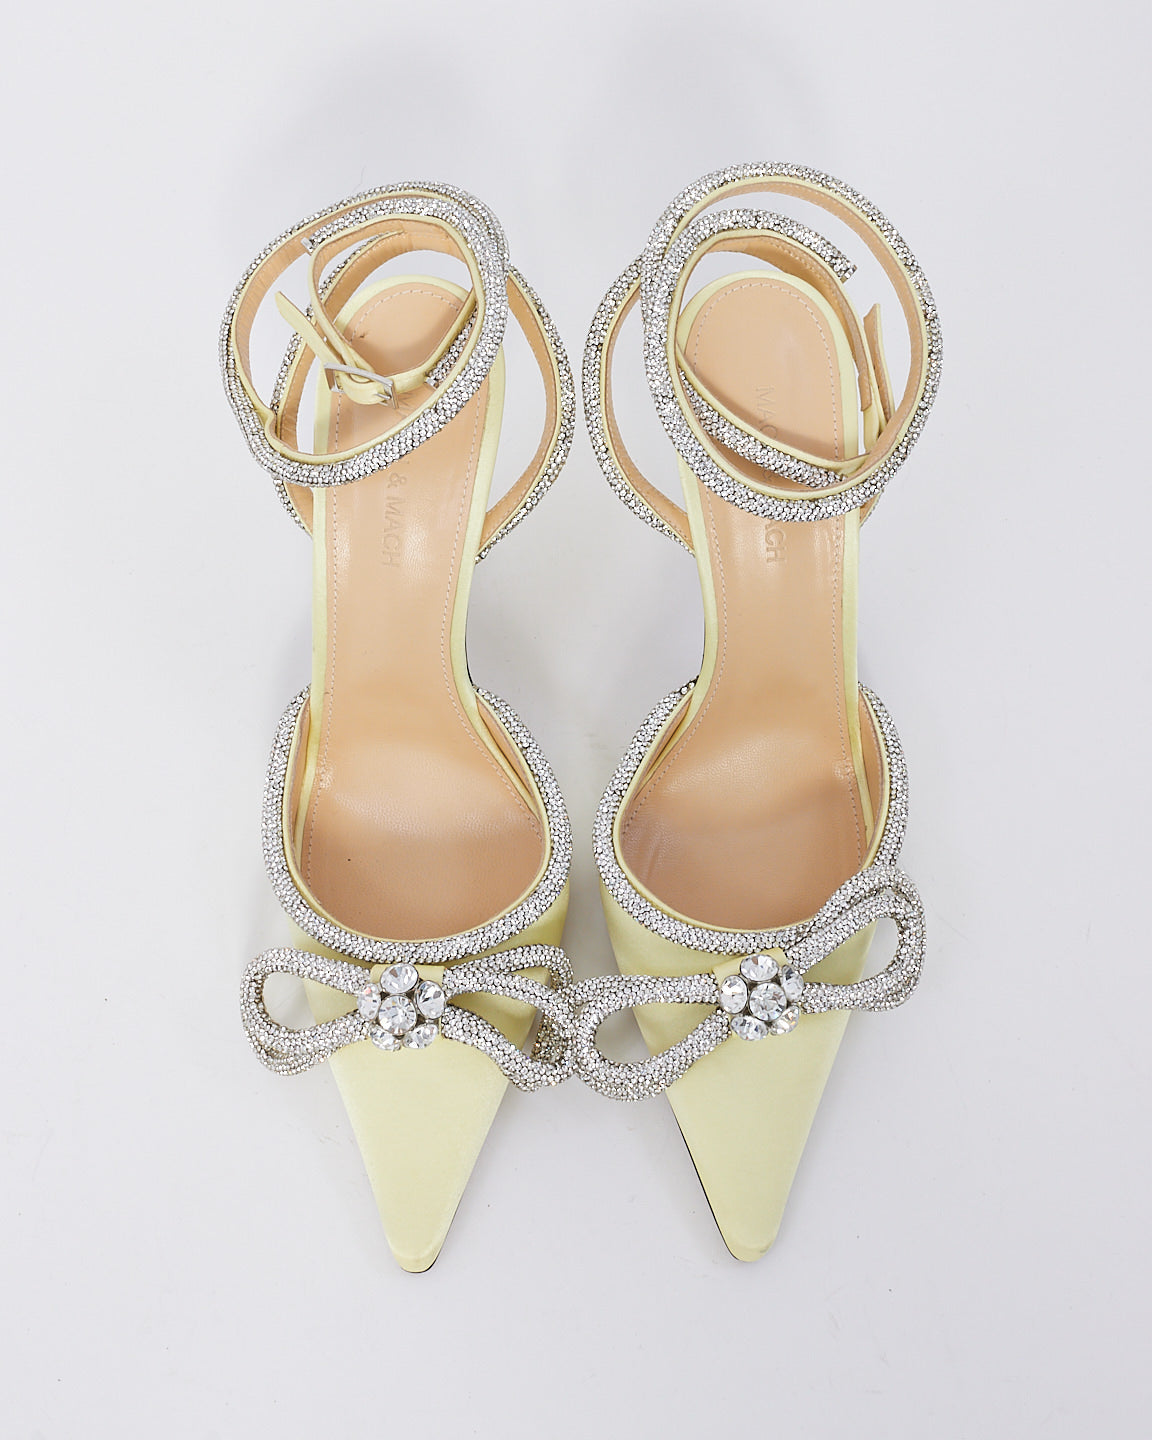 Mach & Mach Yellow Satin Crystal Bow Accents Slingback Pumps -40